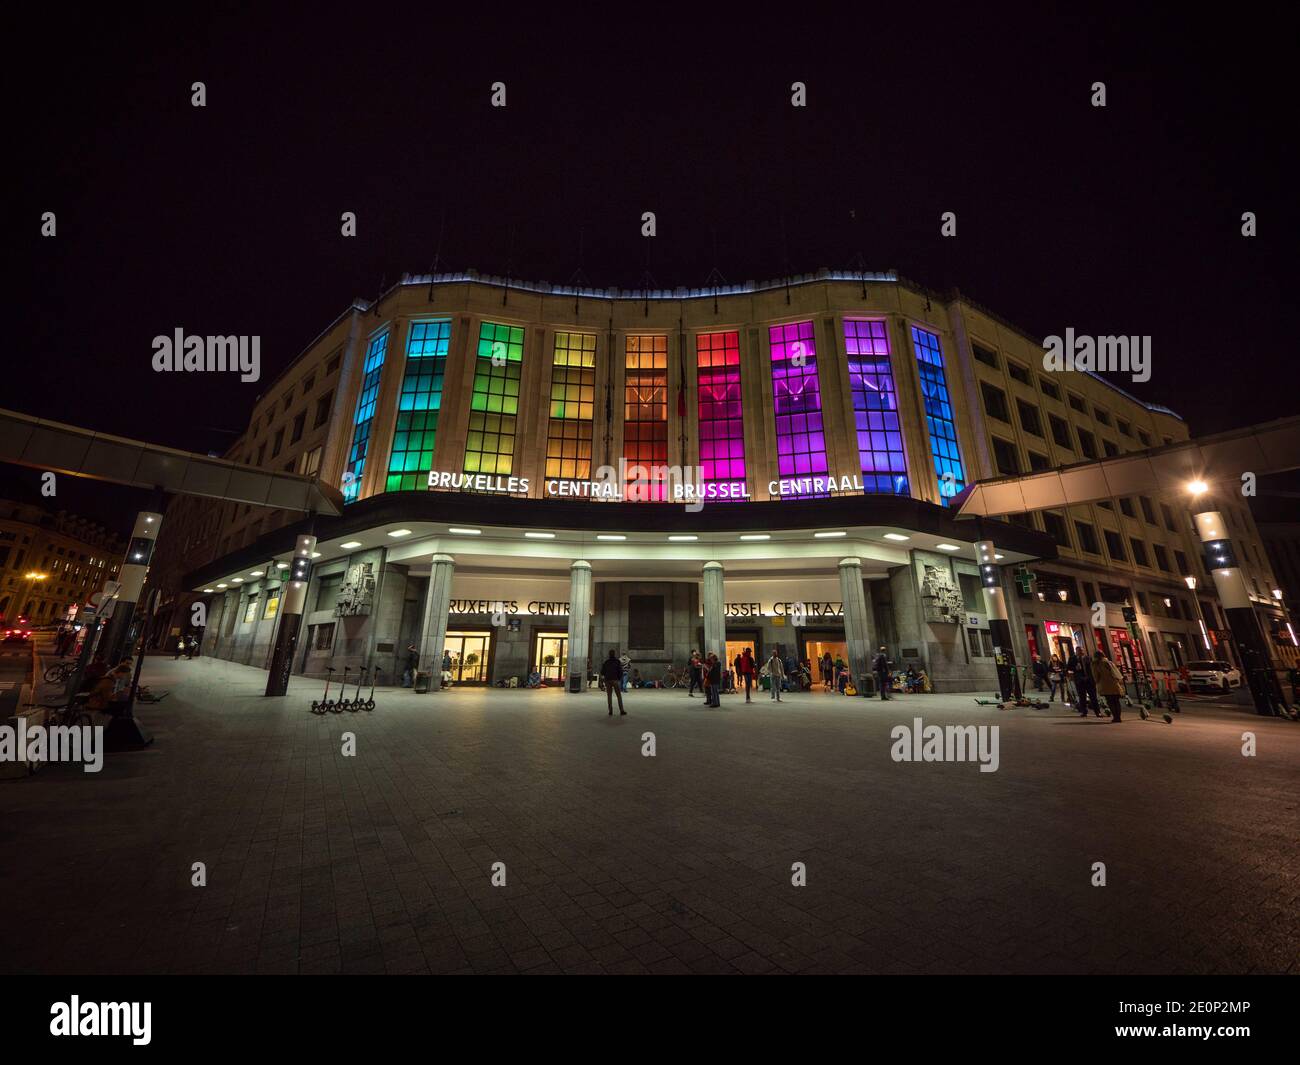 Rainbow colorful lights illumination of modernist Brussels Central train station Bruxelles Brussel Centraal main entrance Belgium Europe Stock Photo